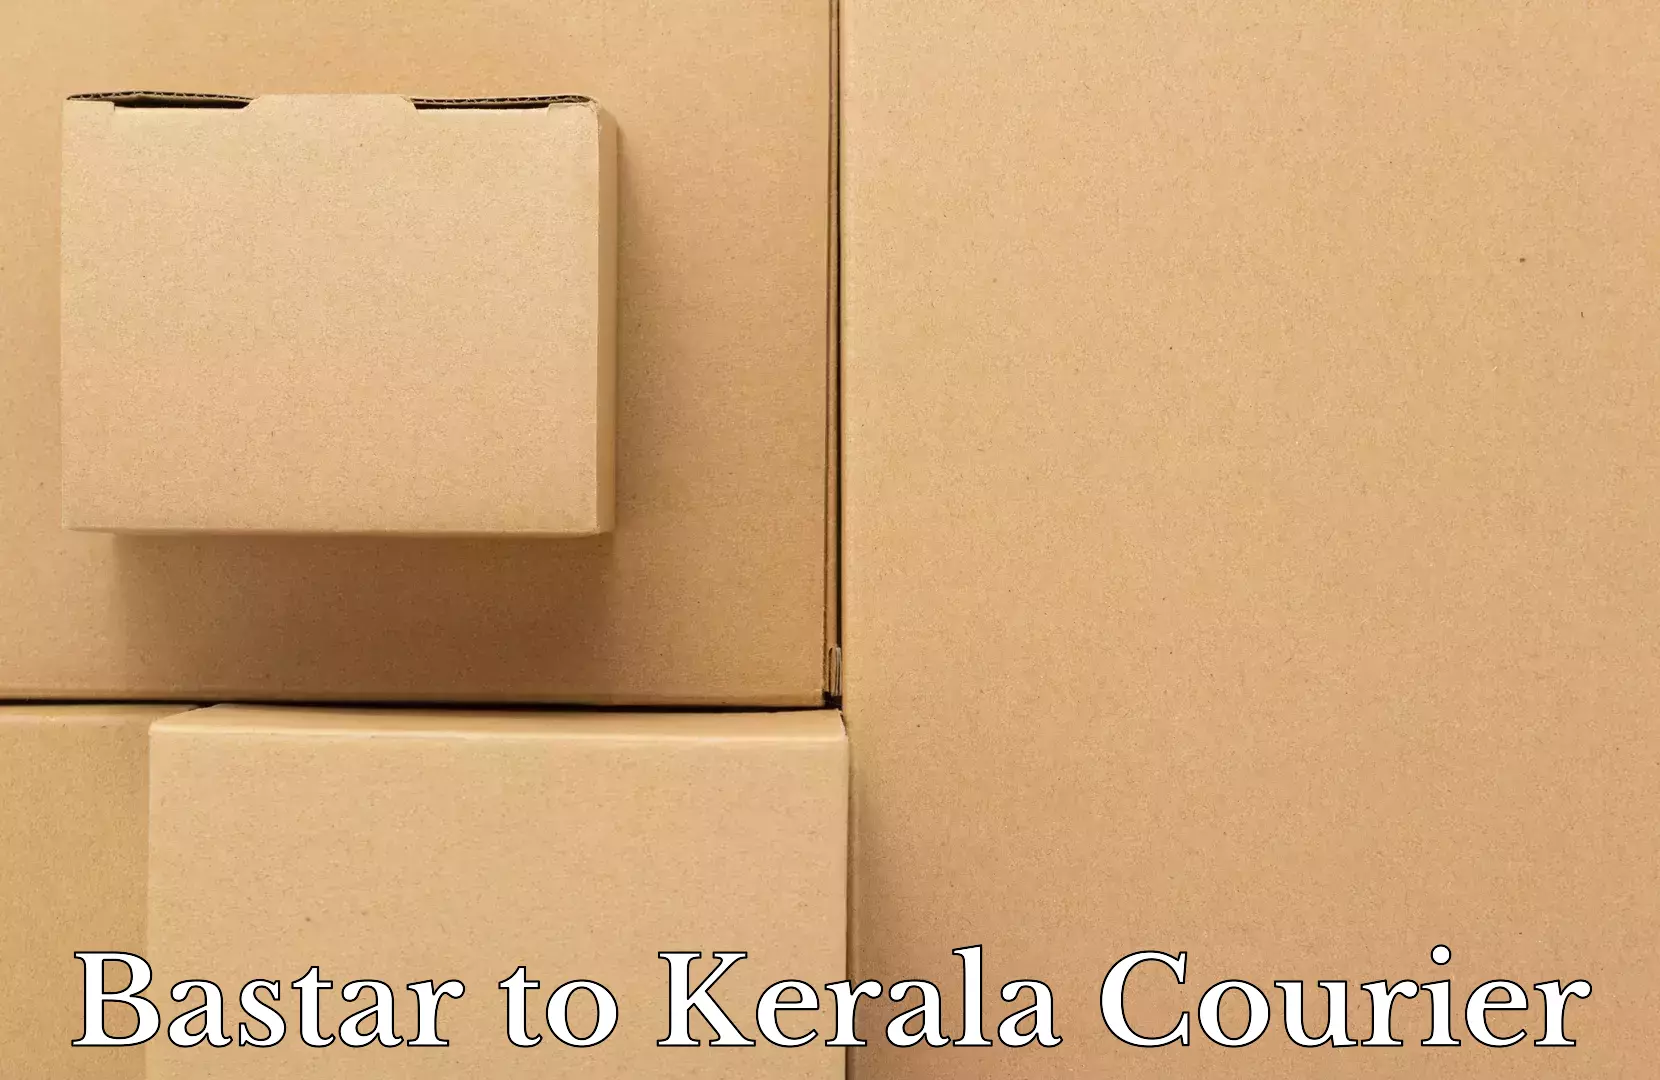 Luggage delivery network Bastar to Kottayam